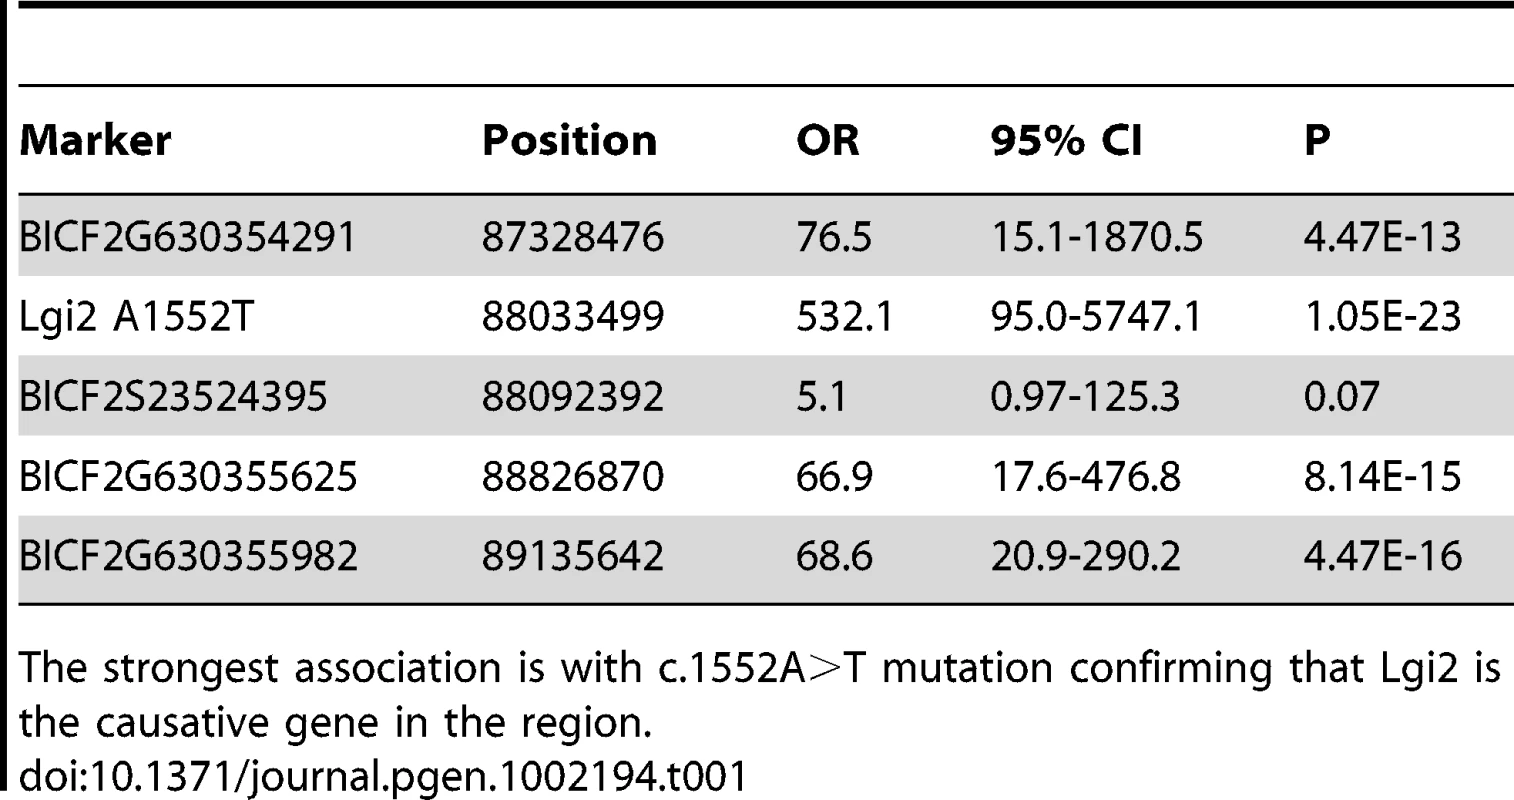 Four highly-associated SNPs spread across the linked 1.7 Mb homozygosity region, together with the c.1552A&gt;T mutation, were genotyped and tested for association from 28 BFJE cases and 112 healthy controls.